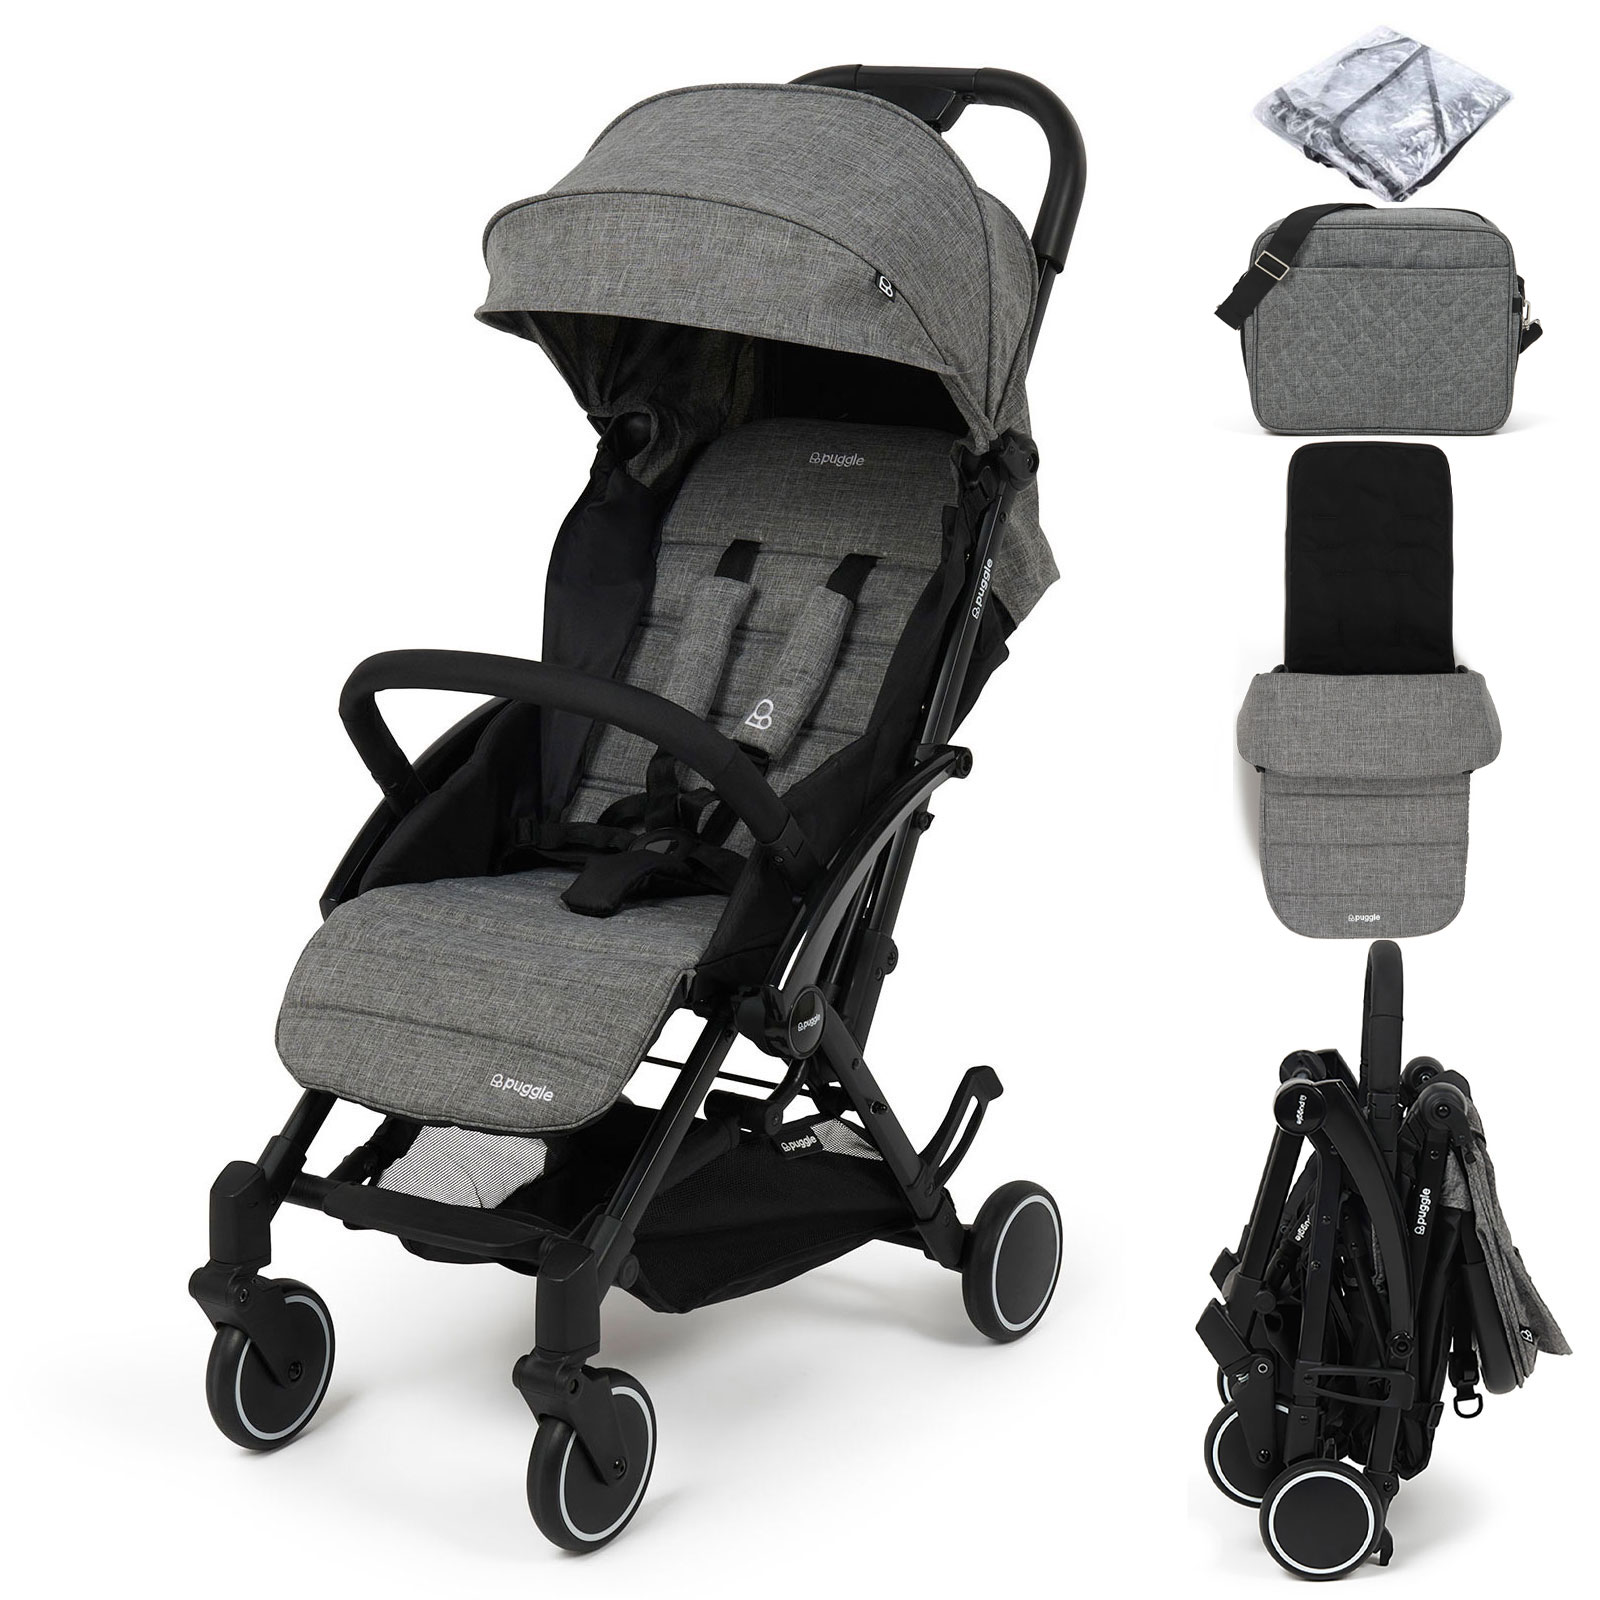 Puggle Seattle Fold & Go Compact Pushchair & Raincover With Monaco Footmuff & Changing Bag - Graphite Grey